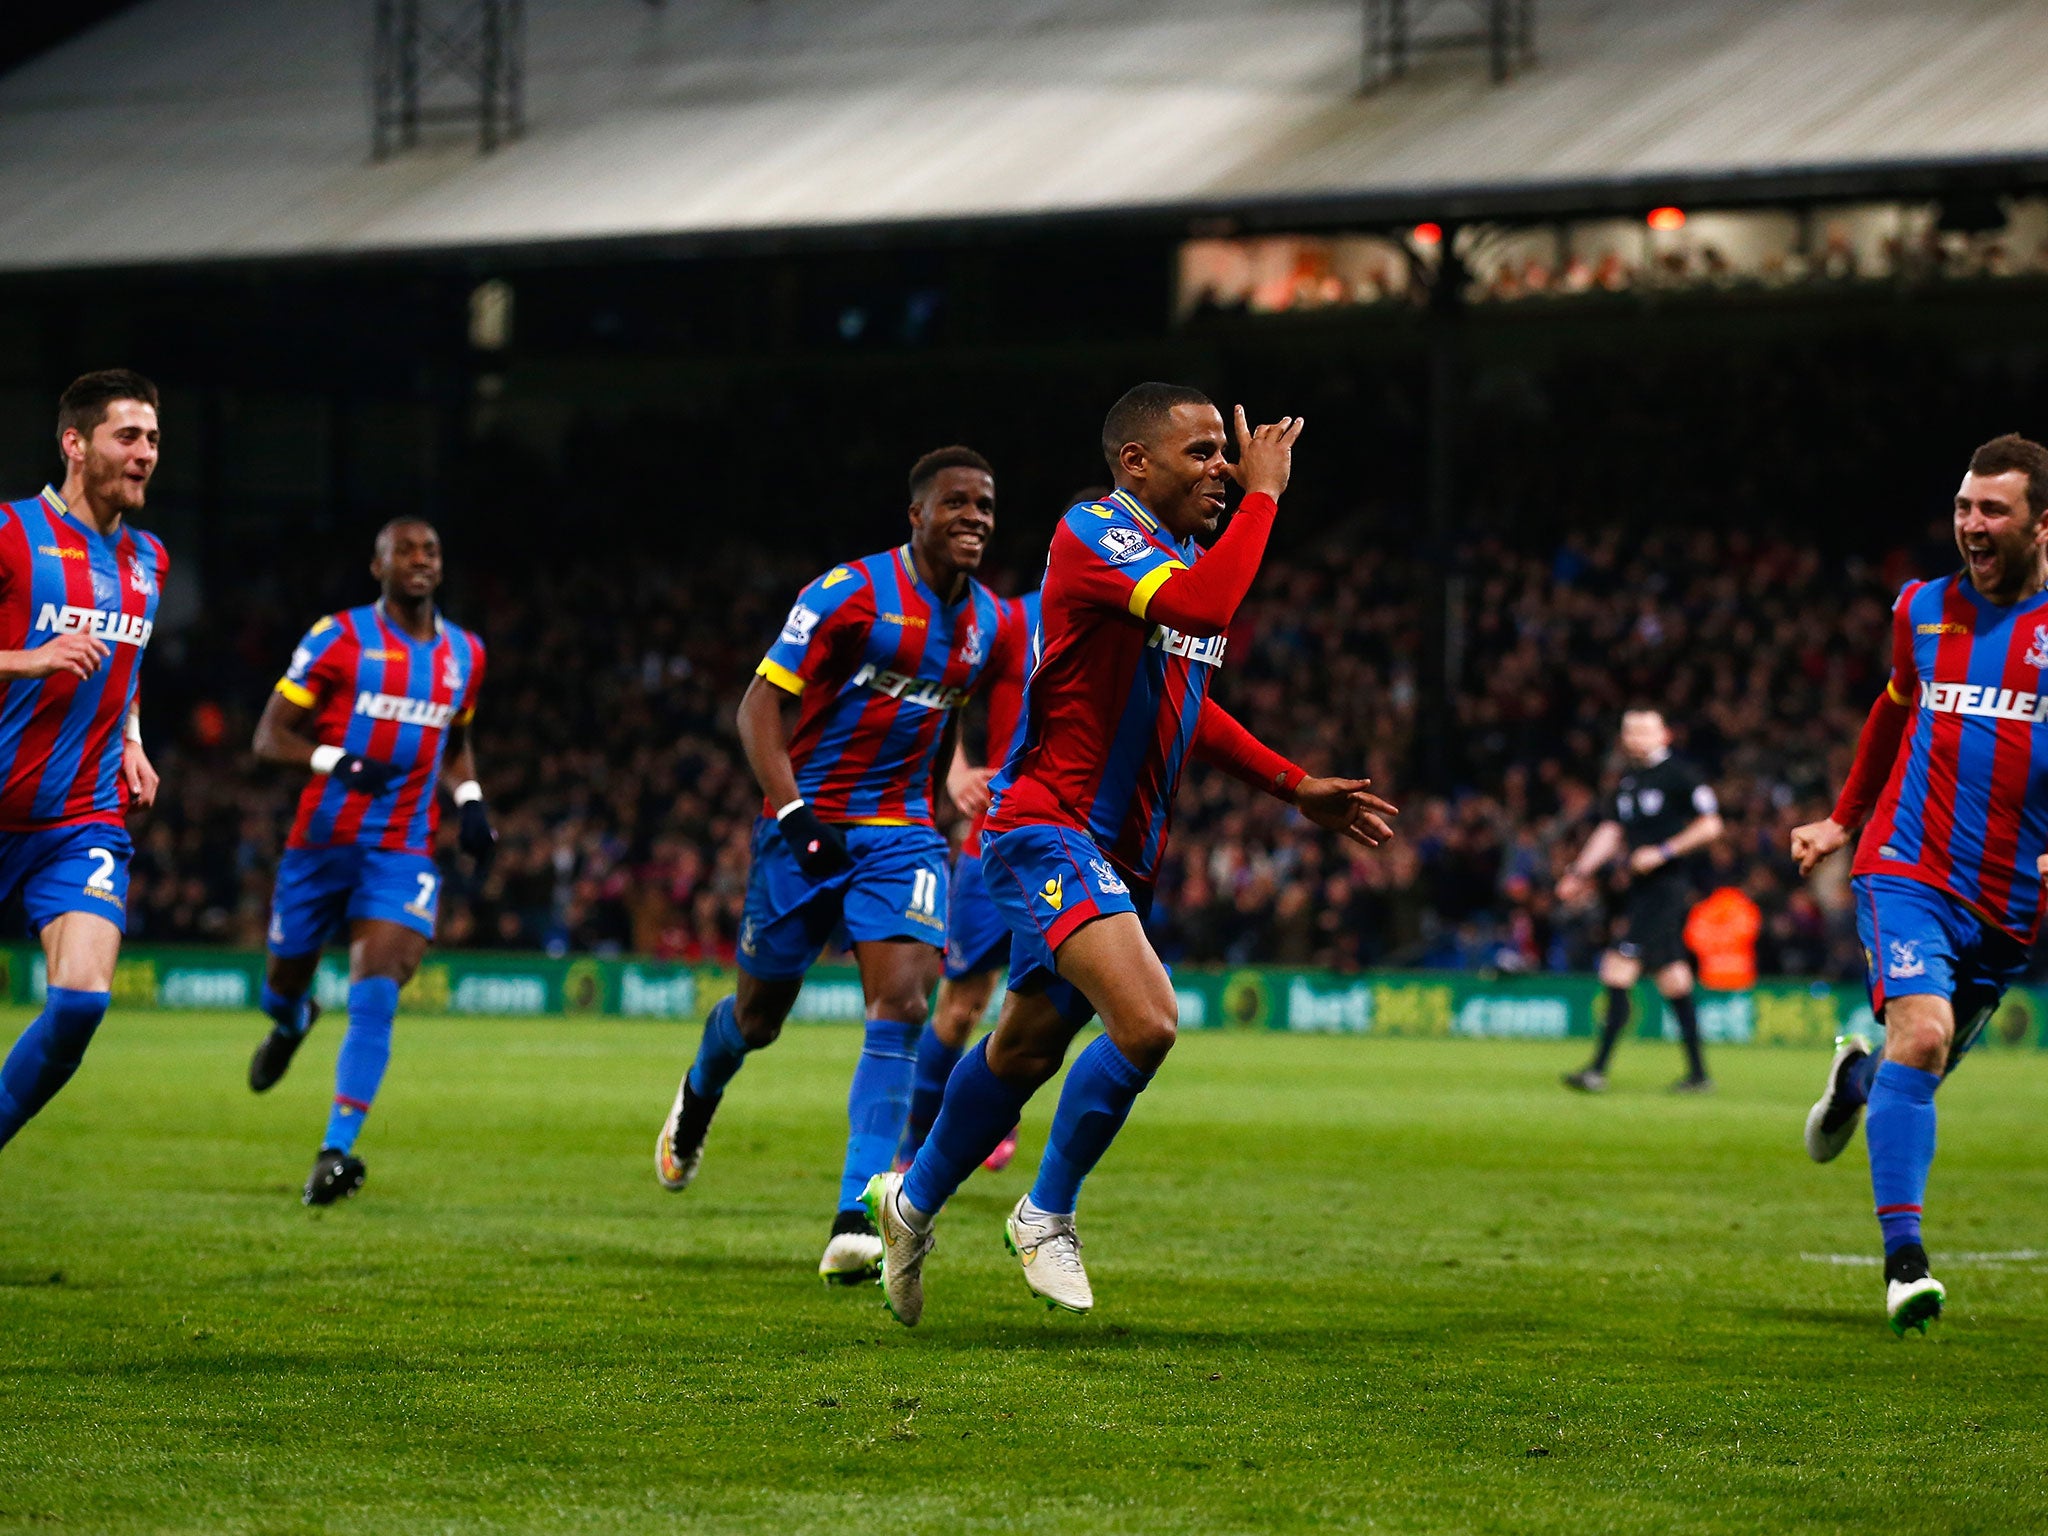 Crystal Palace have drastically improved under Alan Pardew